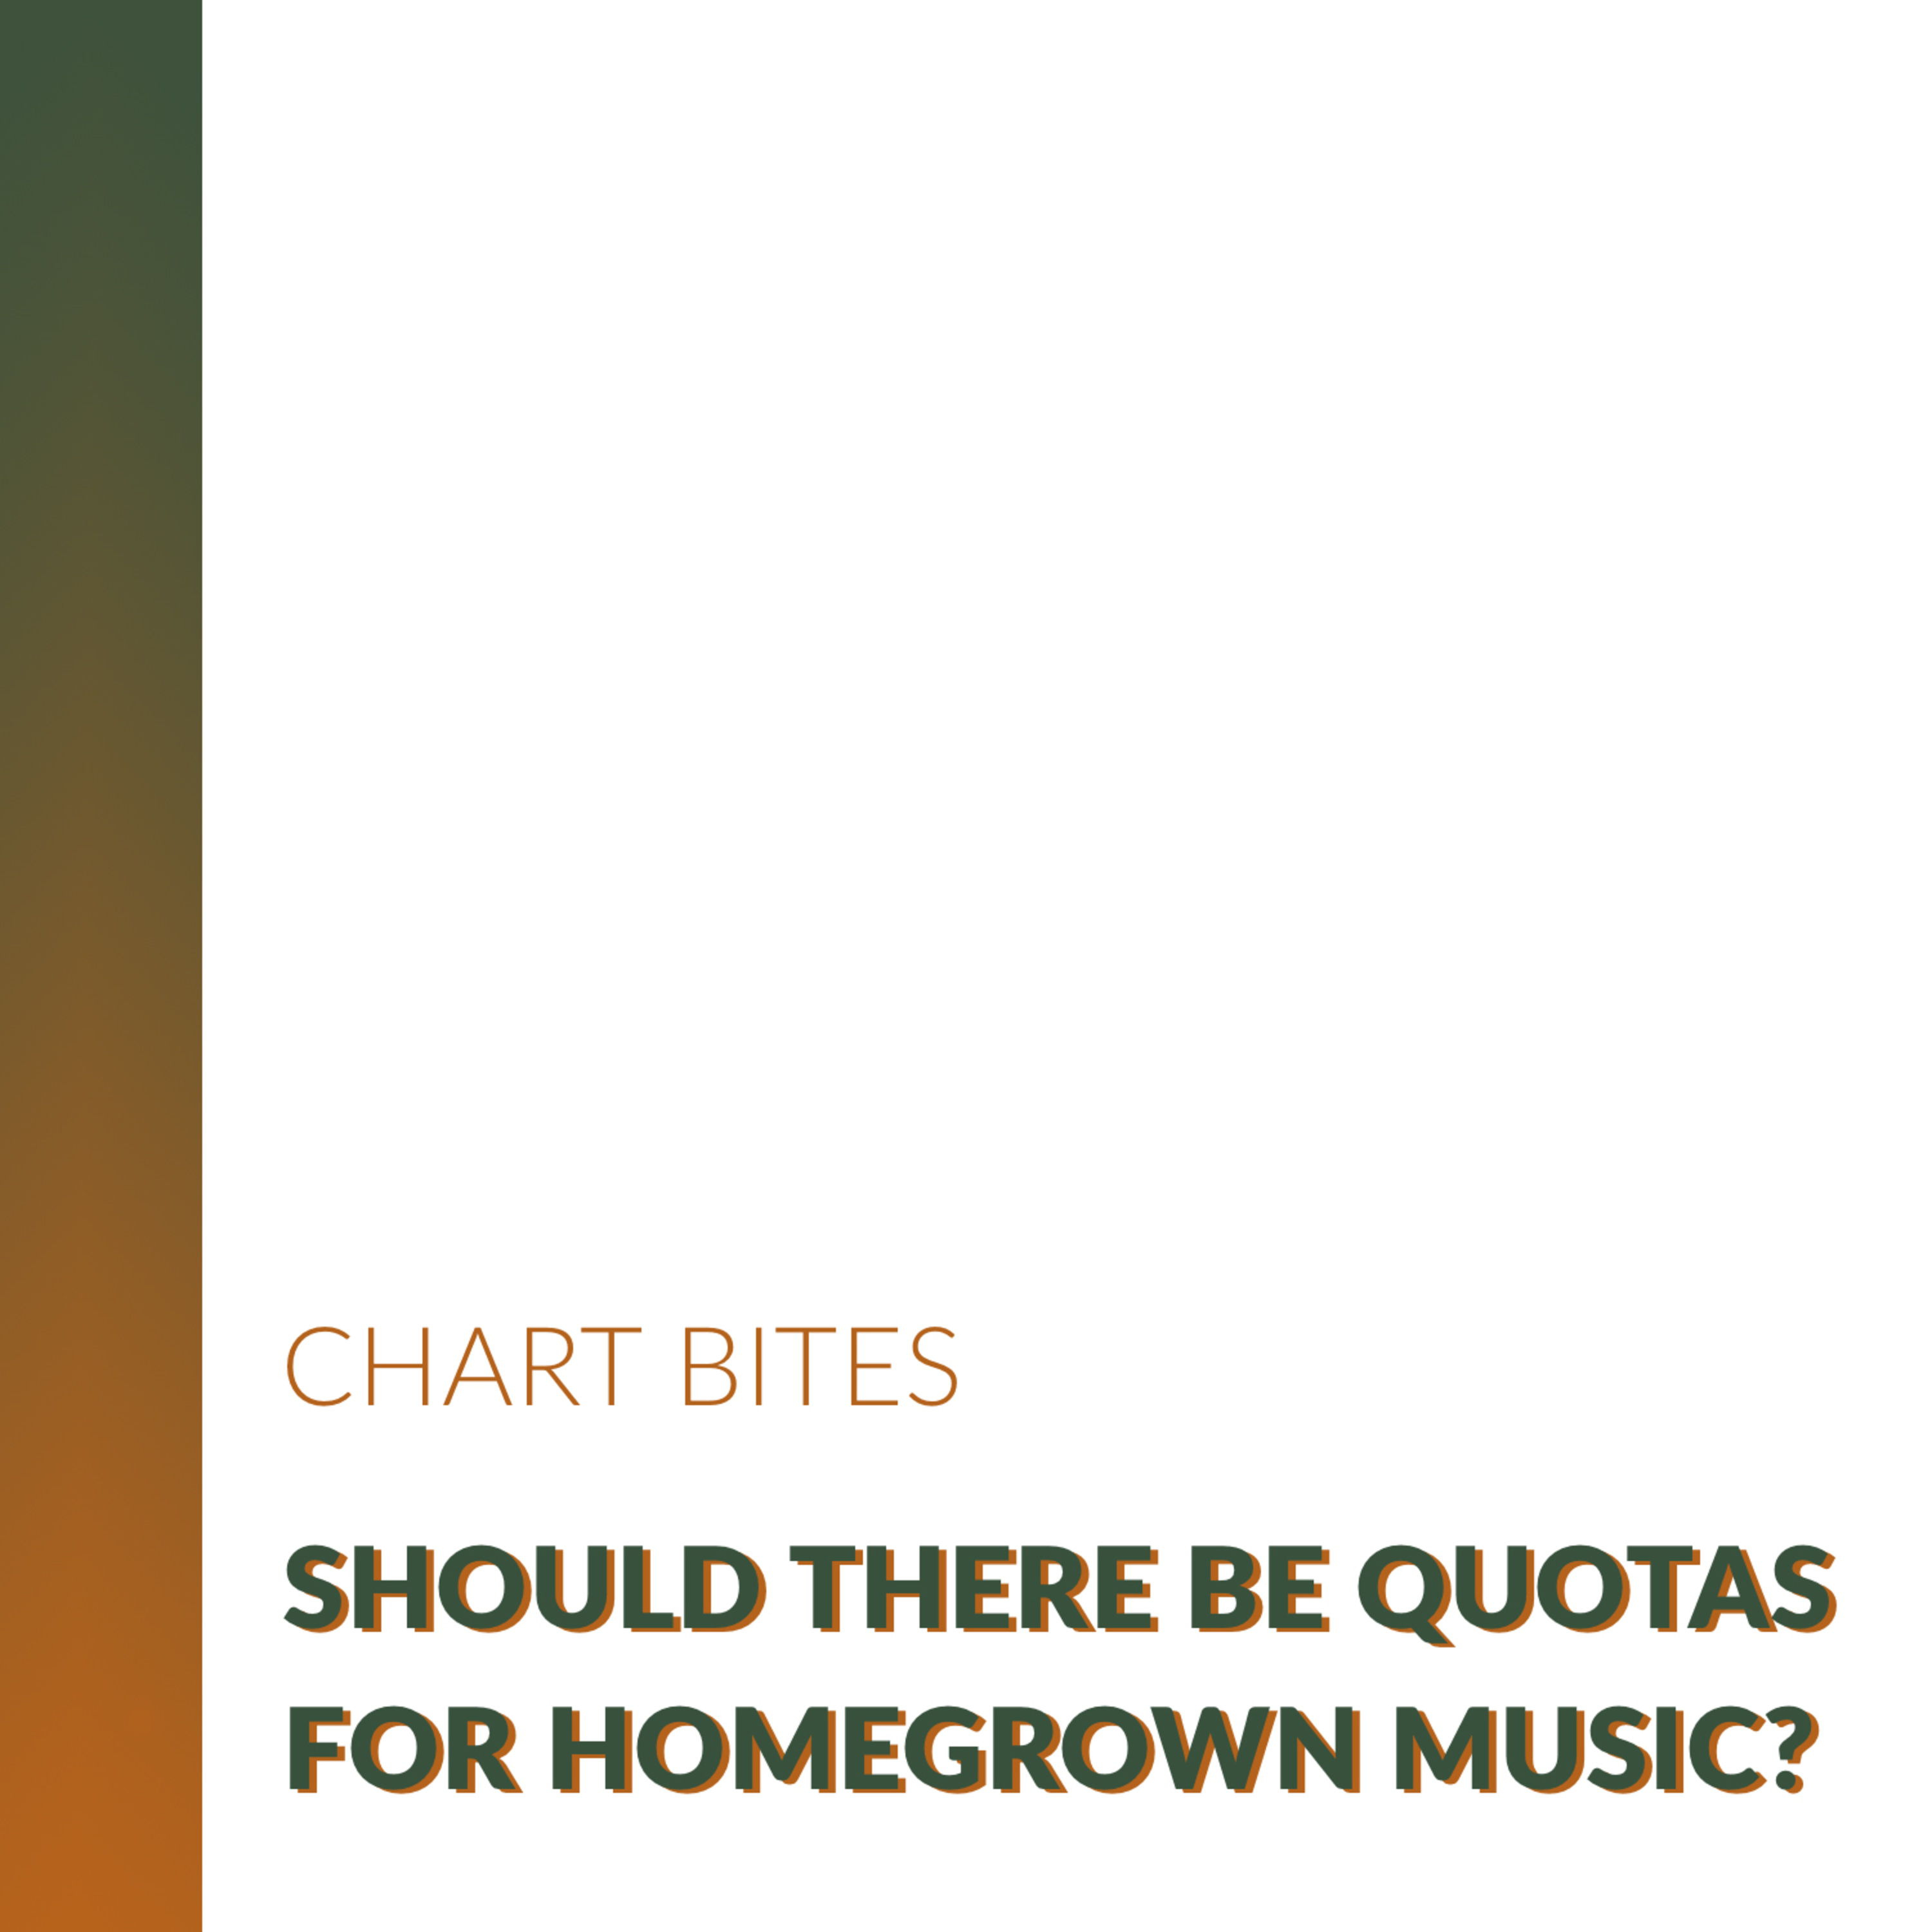 Should there be quotas for homegrown music?